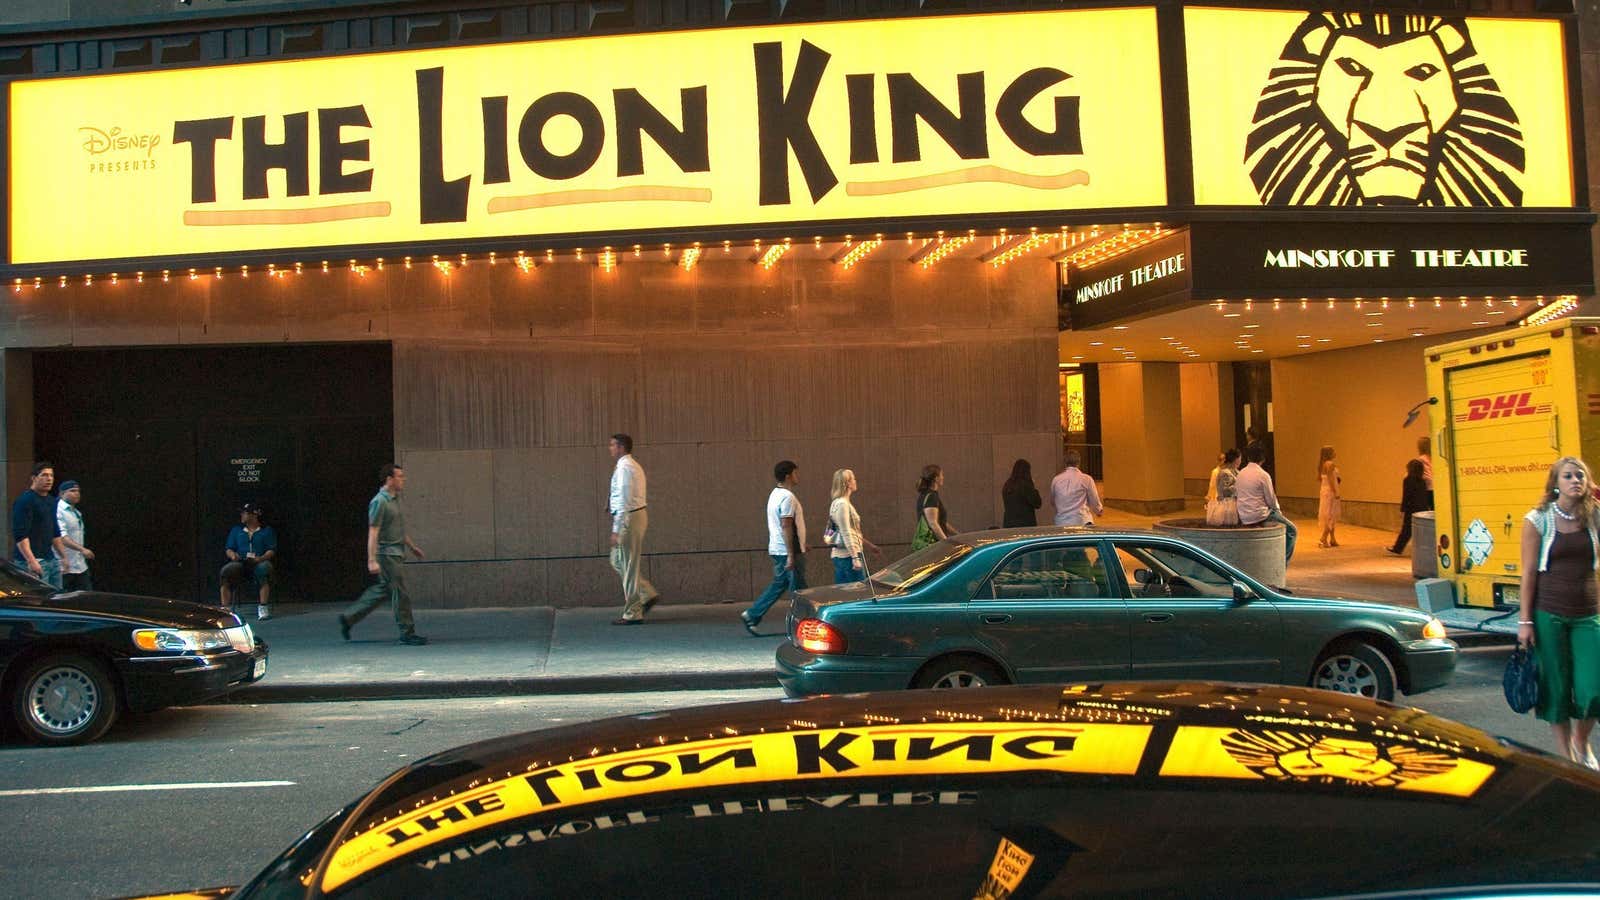 “The Lion King” on Broadway in New York